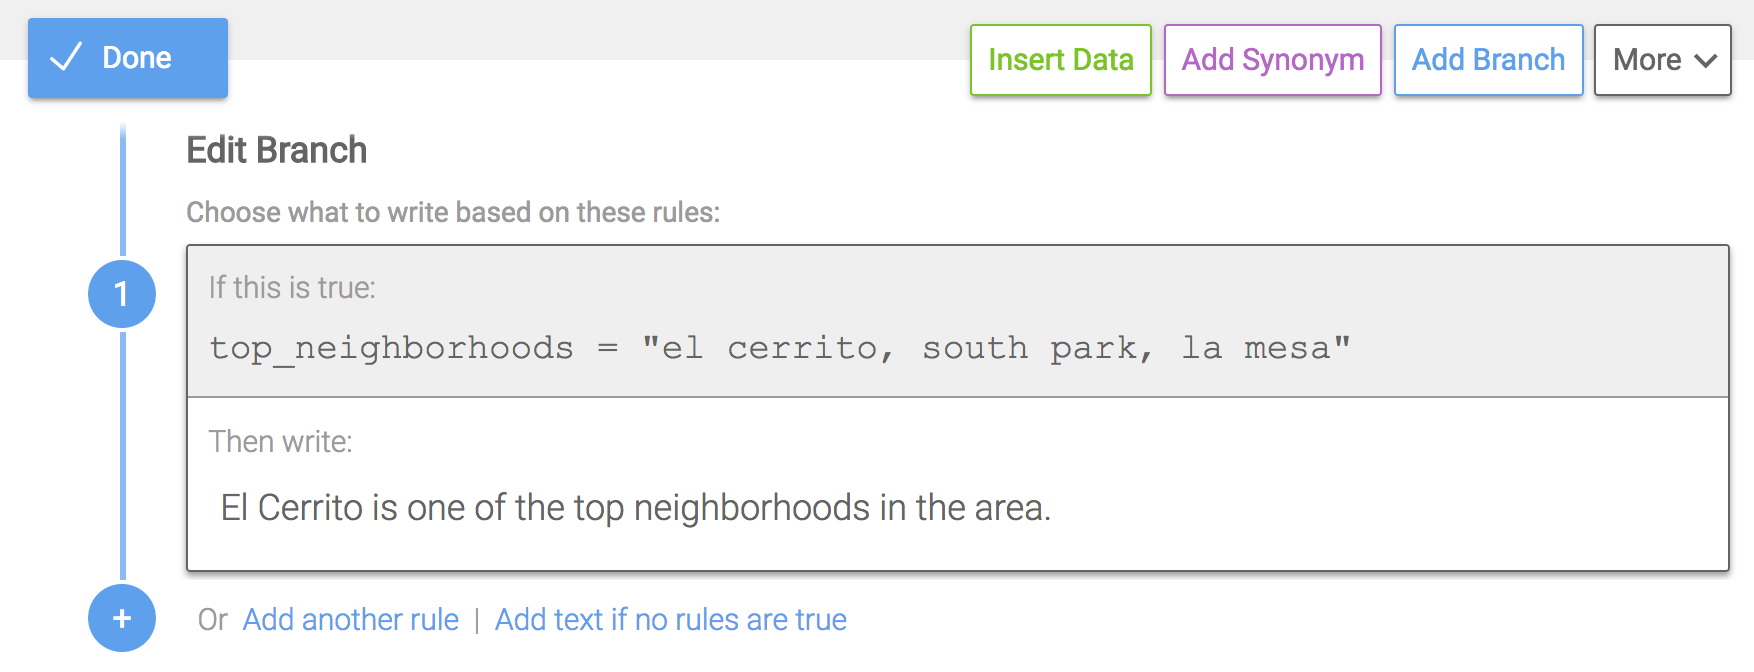 This rule will be True for data that has these exact 3 objects: "el cerrito, south park, la mesa".